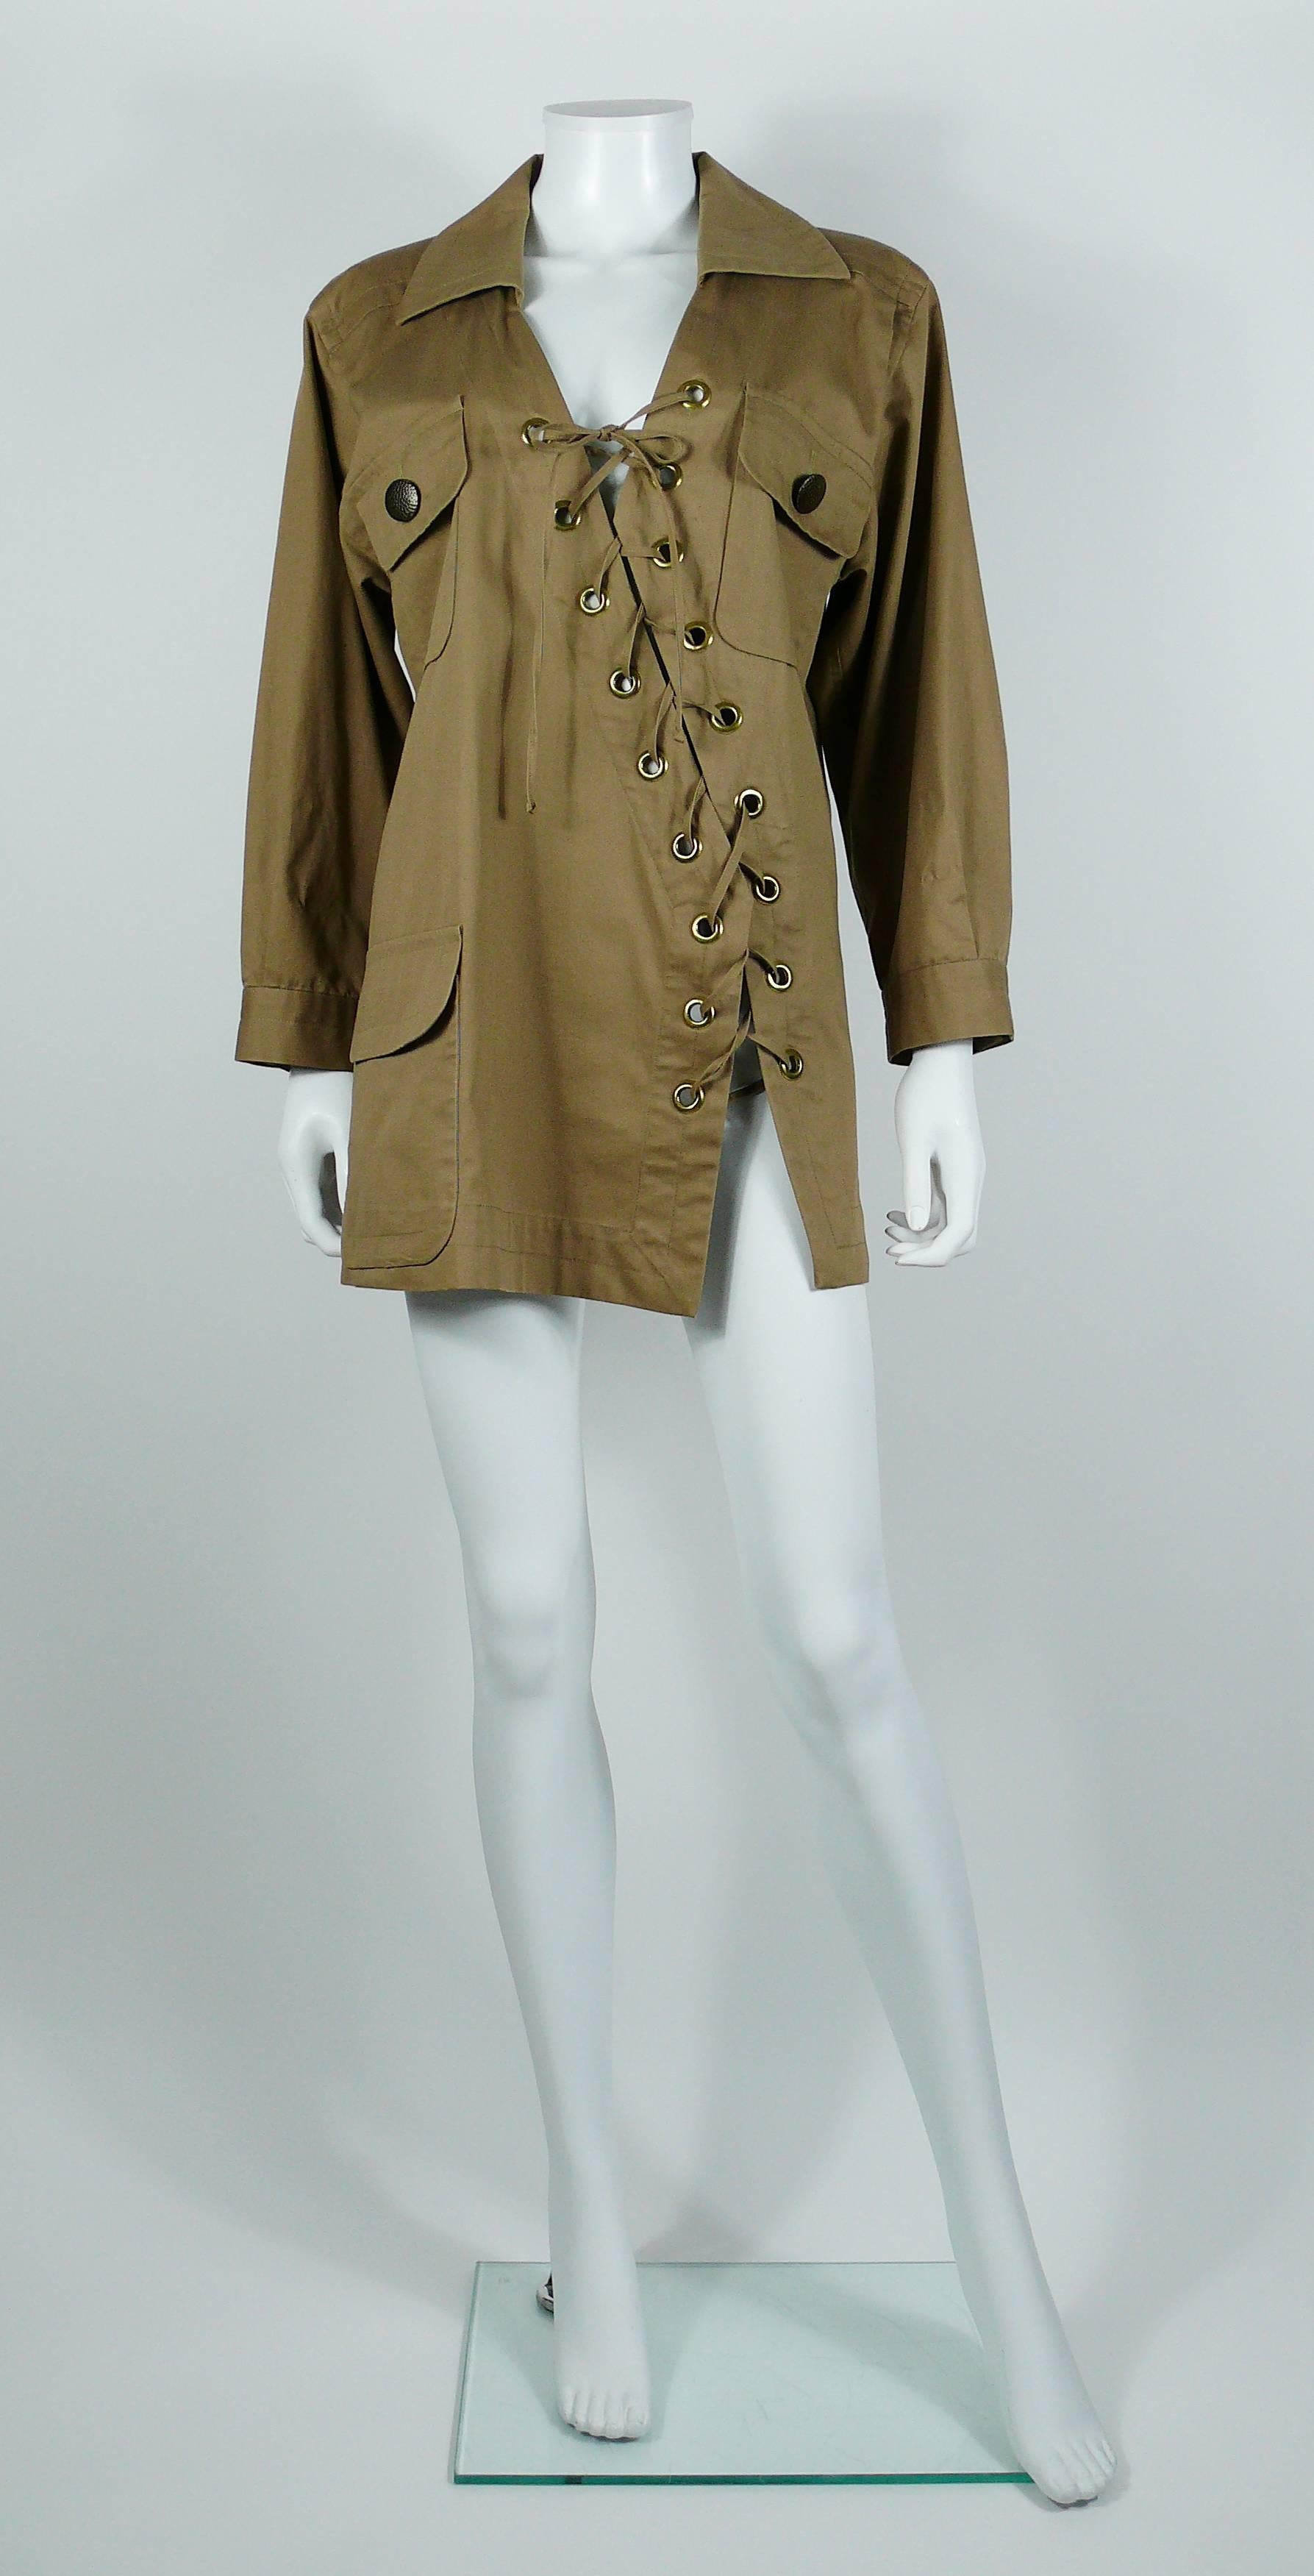 YVES SAINT LAURENT vintage beige cotton Safari tunic with asymmetric lacing.

Spring/Summer 1990 Ready-to-Wear Collection.

This tunic features :
- Asymmetric lacing.
- Long sleeves.
- Bronze color with antique patina hammered buttons.
- Metal